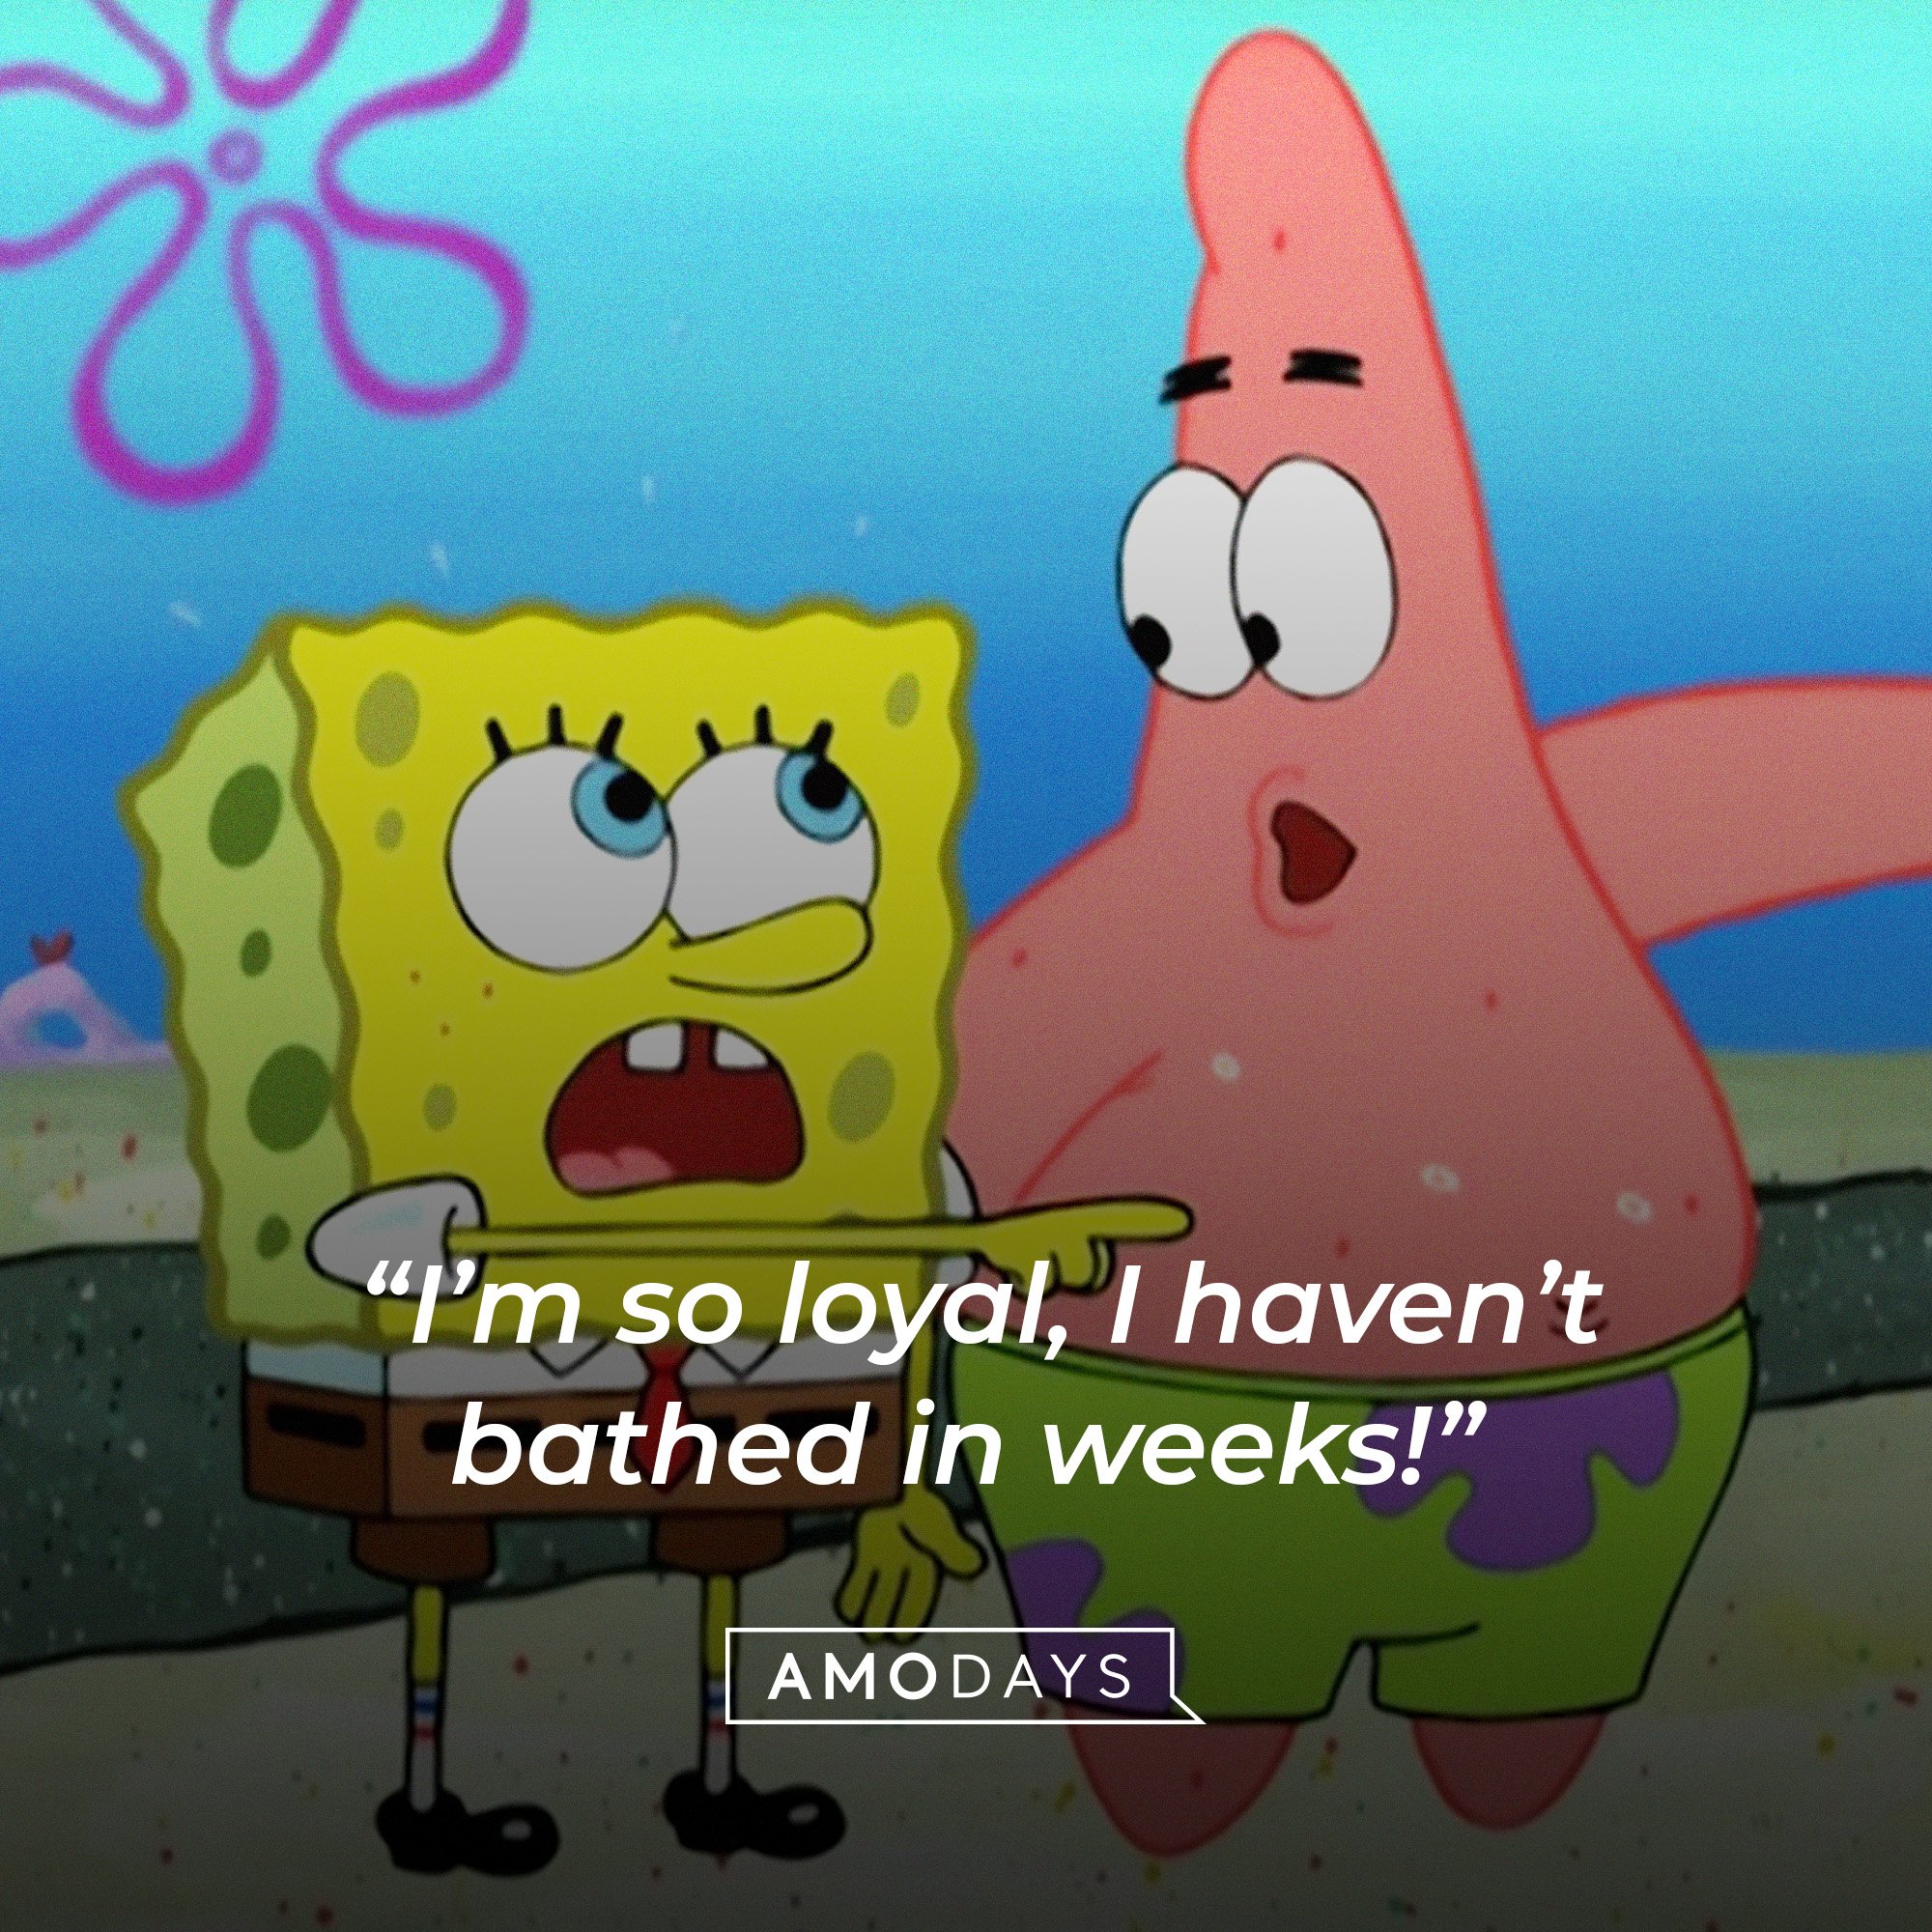 Patrick Star’s quote: “I’m so loyal, I haven’t bathed in weeks!” | Image: AmoDays